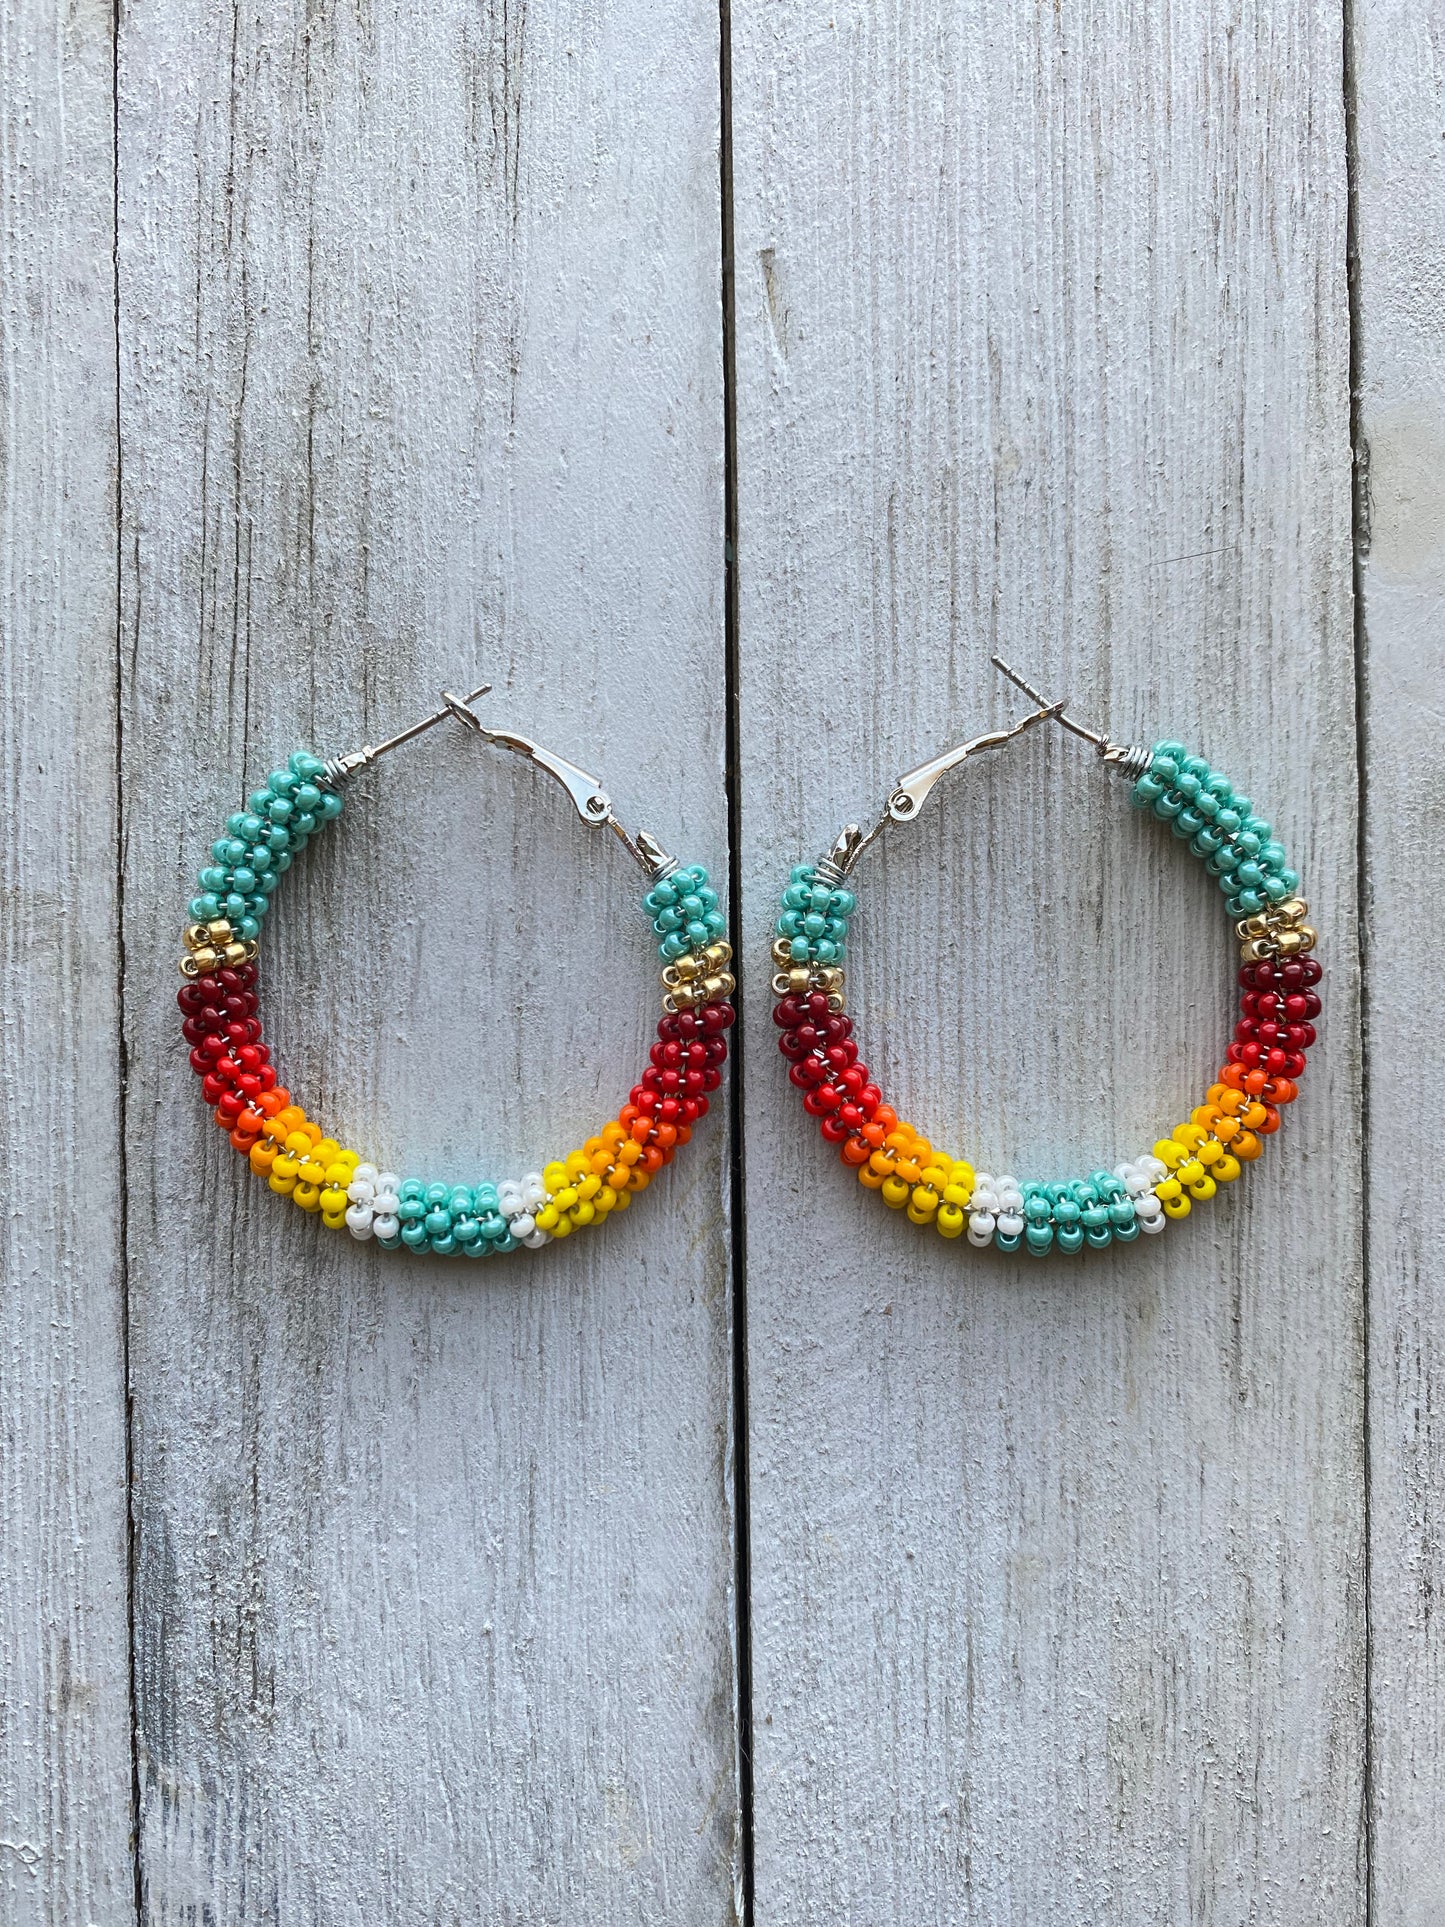 Turquoise Medium Iconic Hoops by Beading It Real